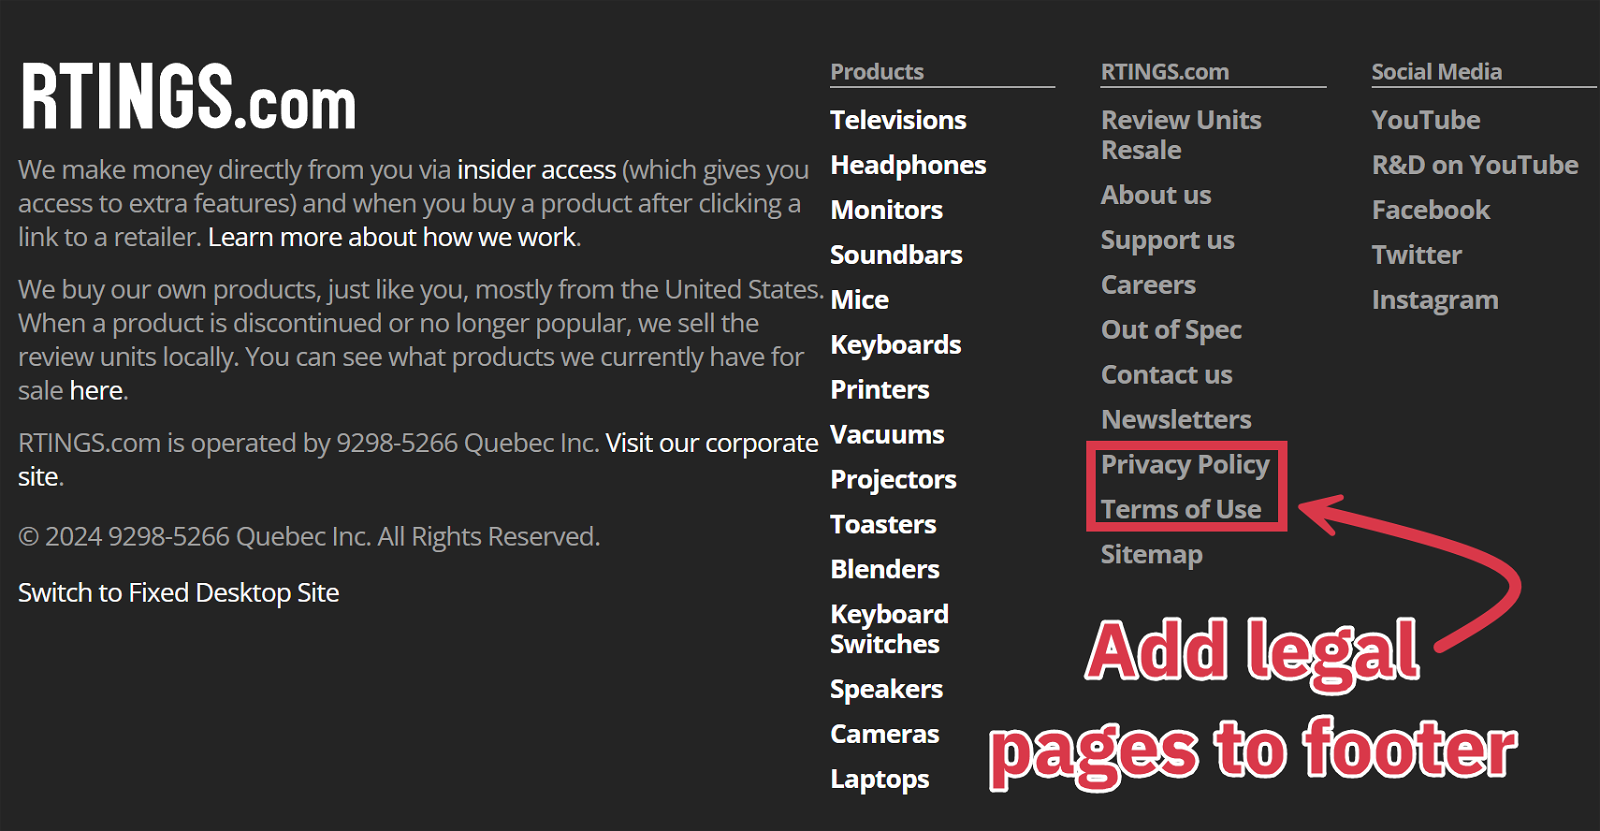 RTINGS.com legal pages on footer